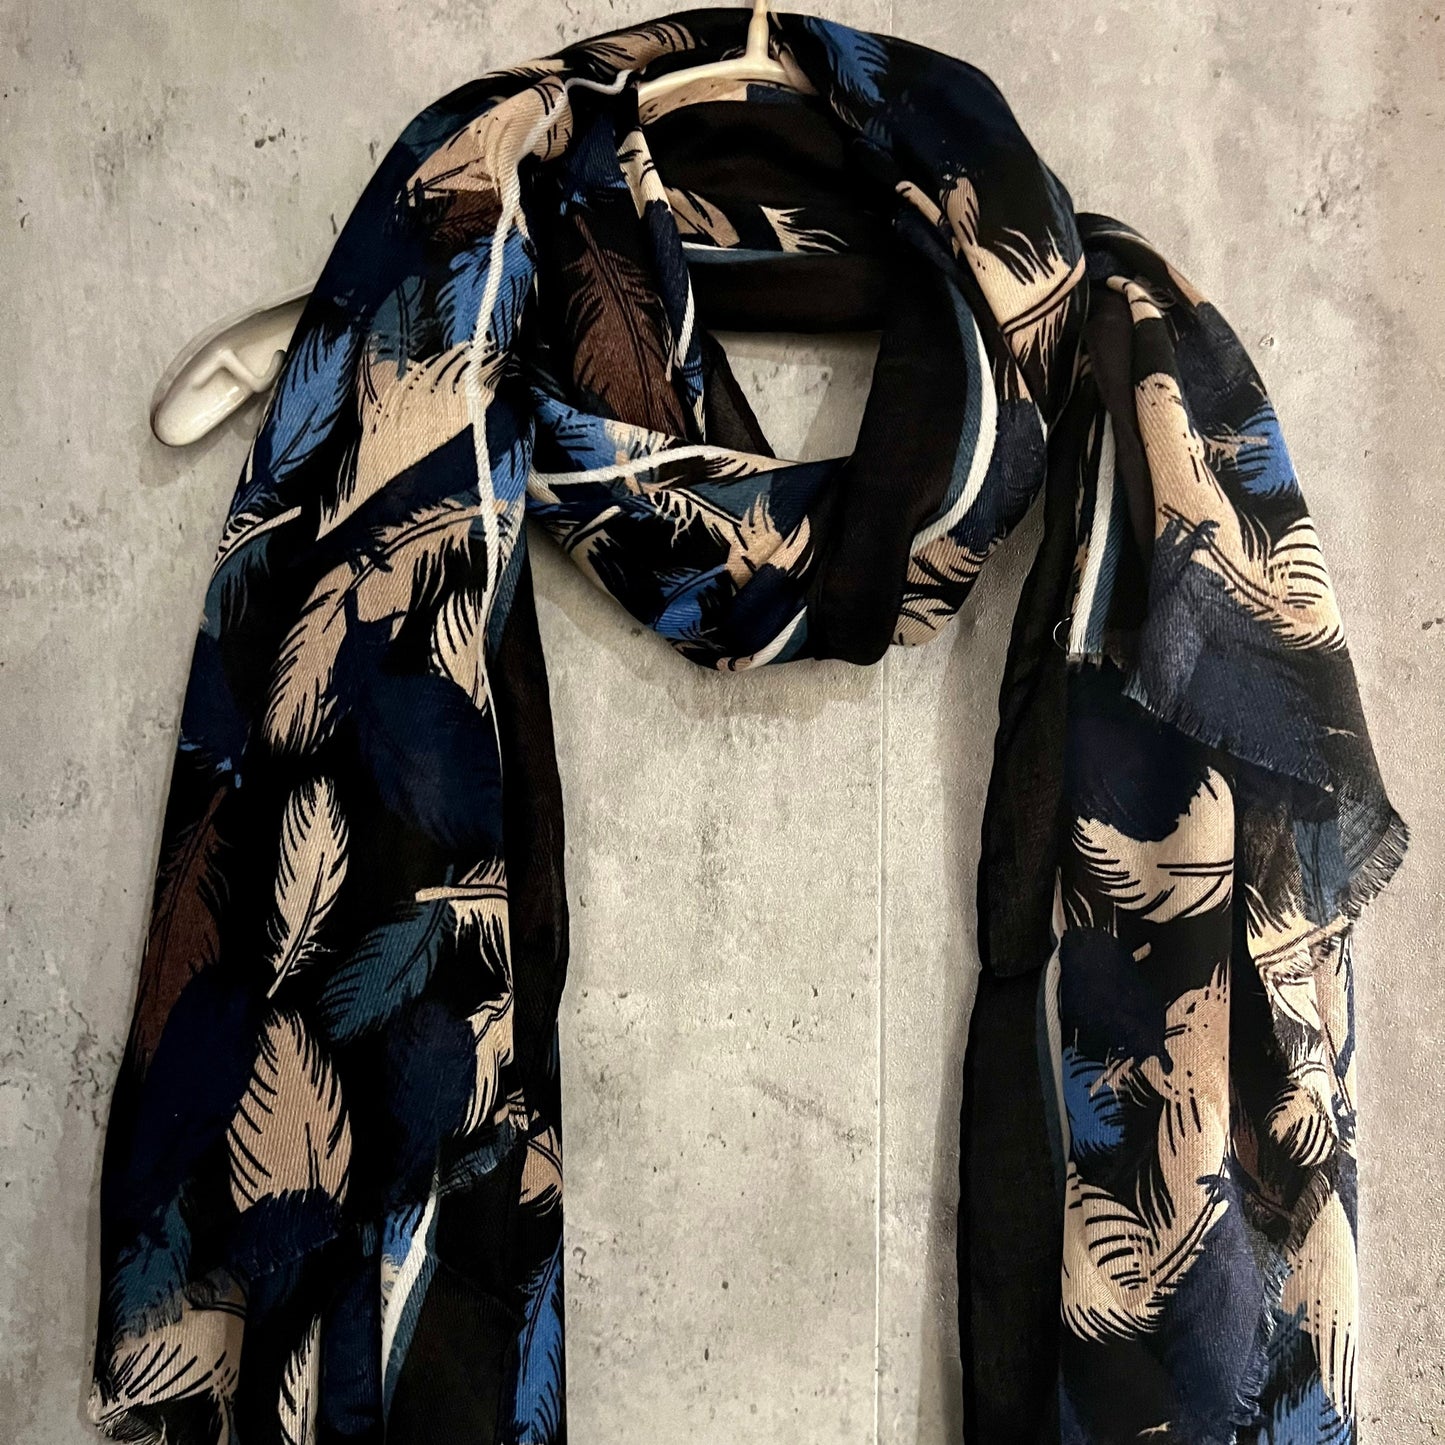 Floating Blue Beige Feathers Black Cotton Scarf/Summer Autumn Winter Women Scarf/Gifts For Her Birthday Christmas/UK Seller/Printed Scarf